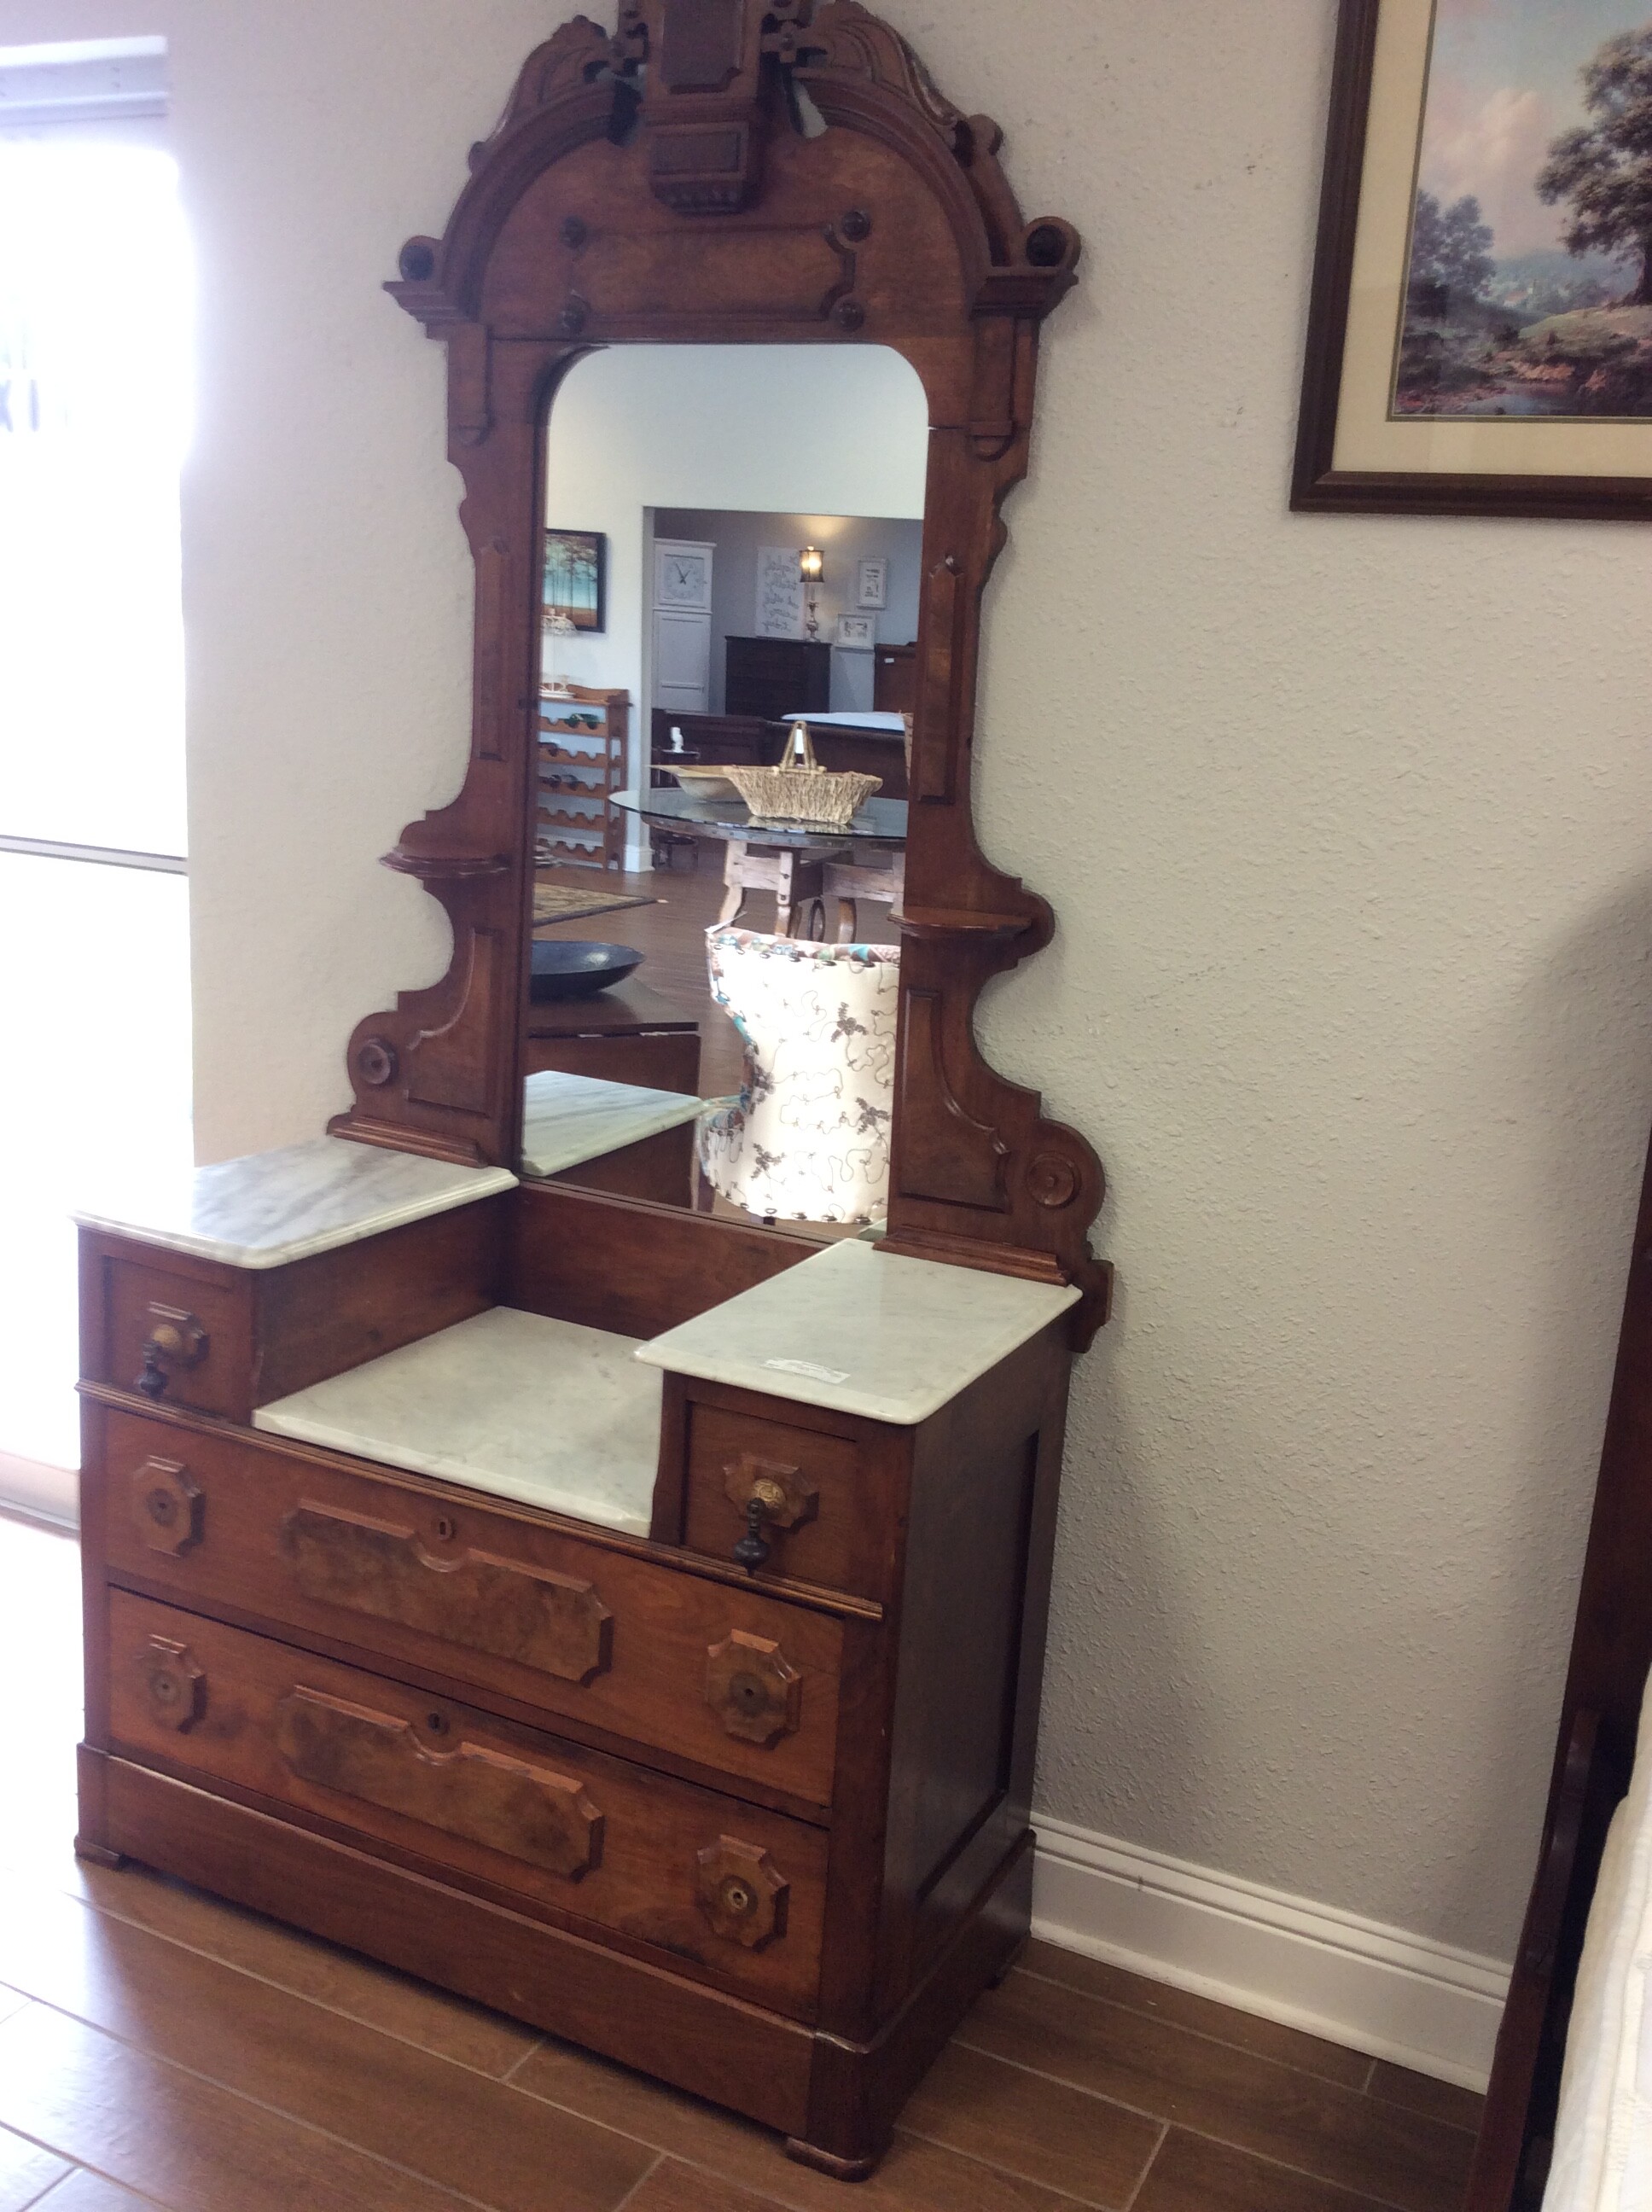 This is a  lovely Victorian mahogony dresser and mirror. The mirror has a pair of carved shelves. The dresser top is marble and has the original hardware.